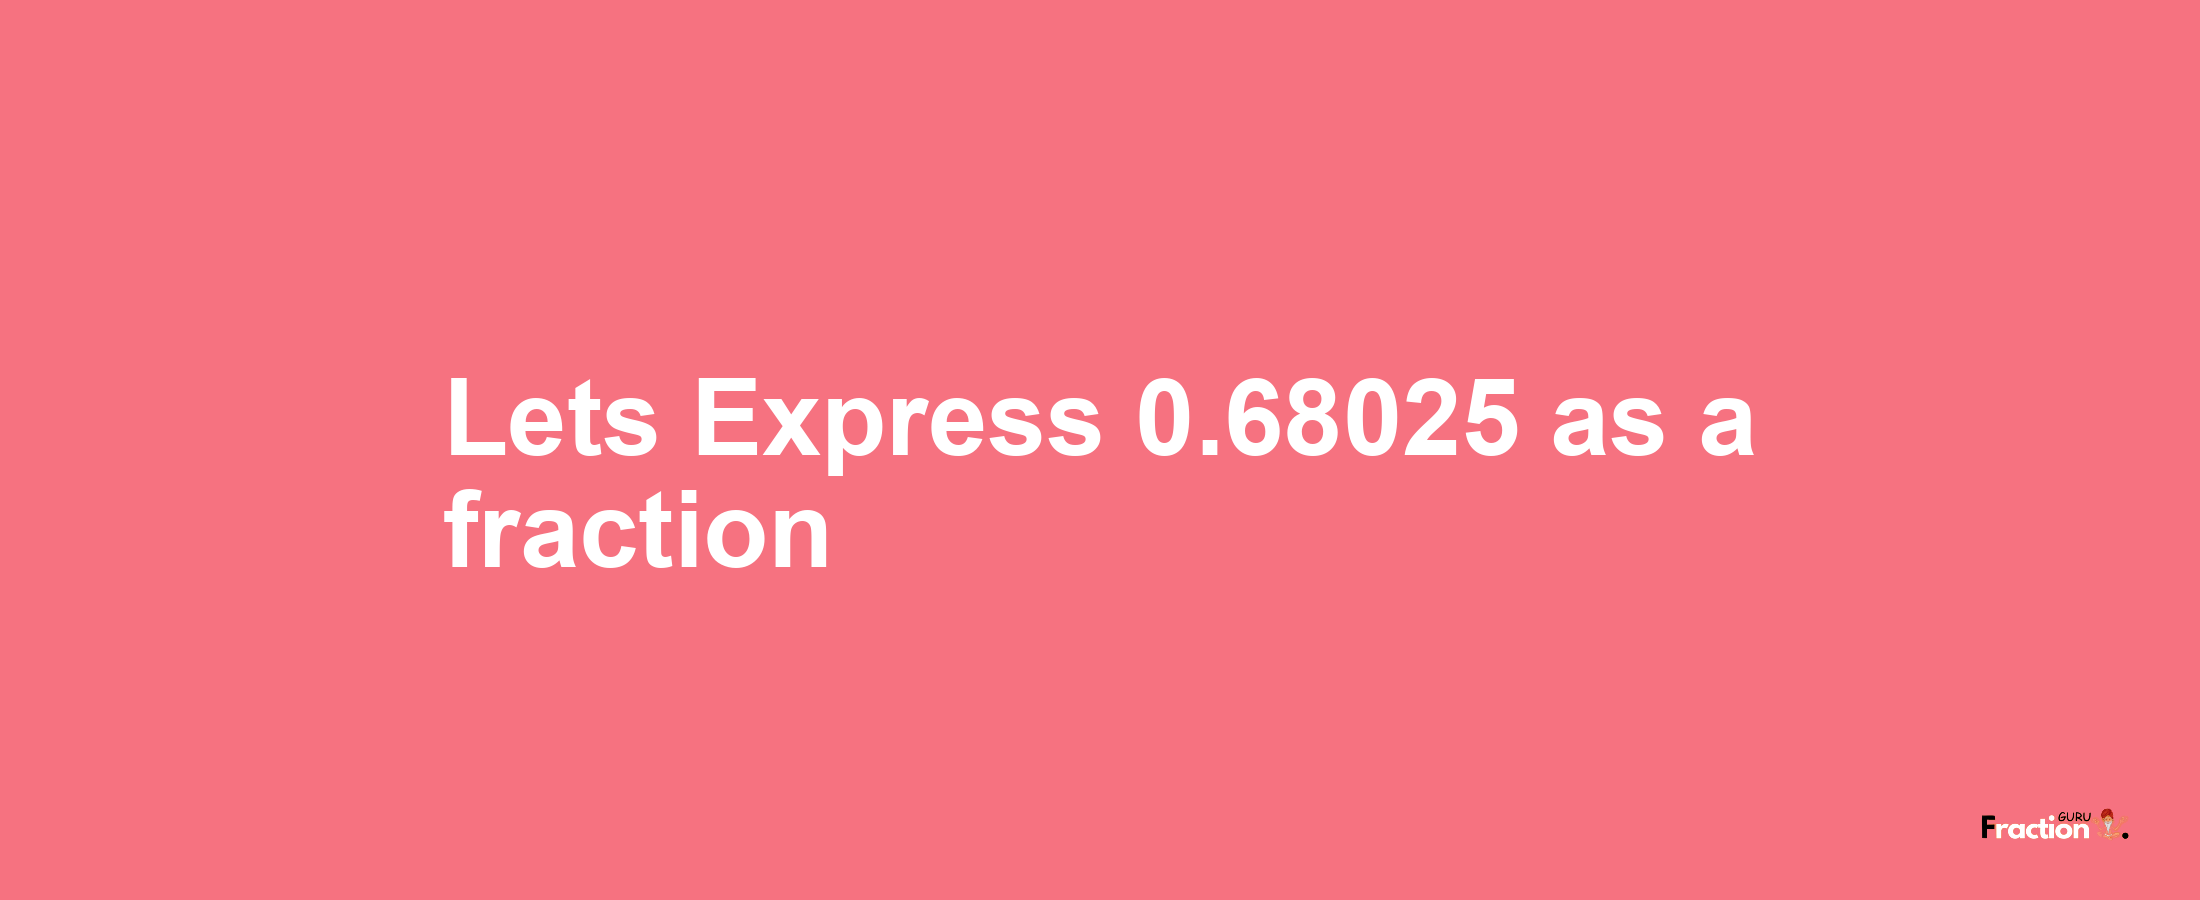 Lets Express 0.68025 as afraction